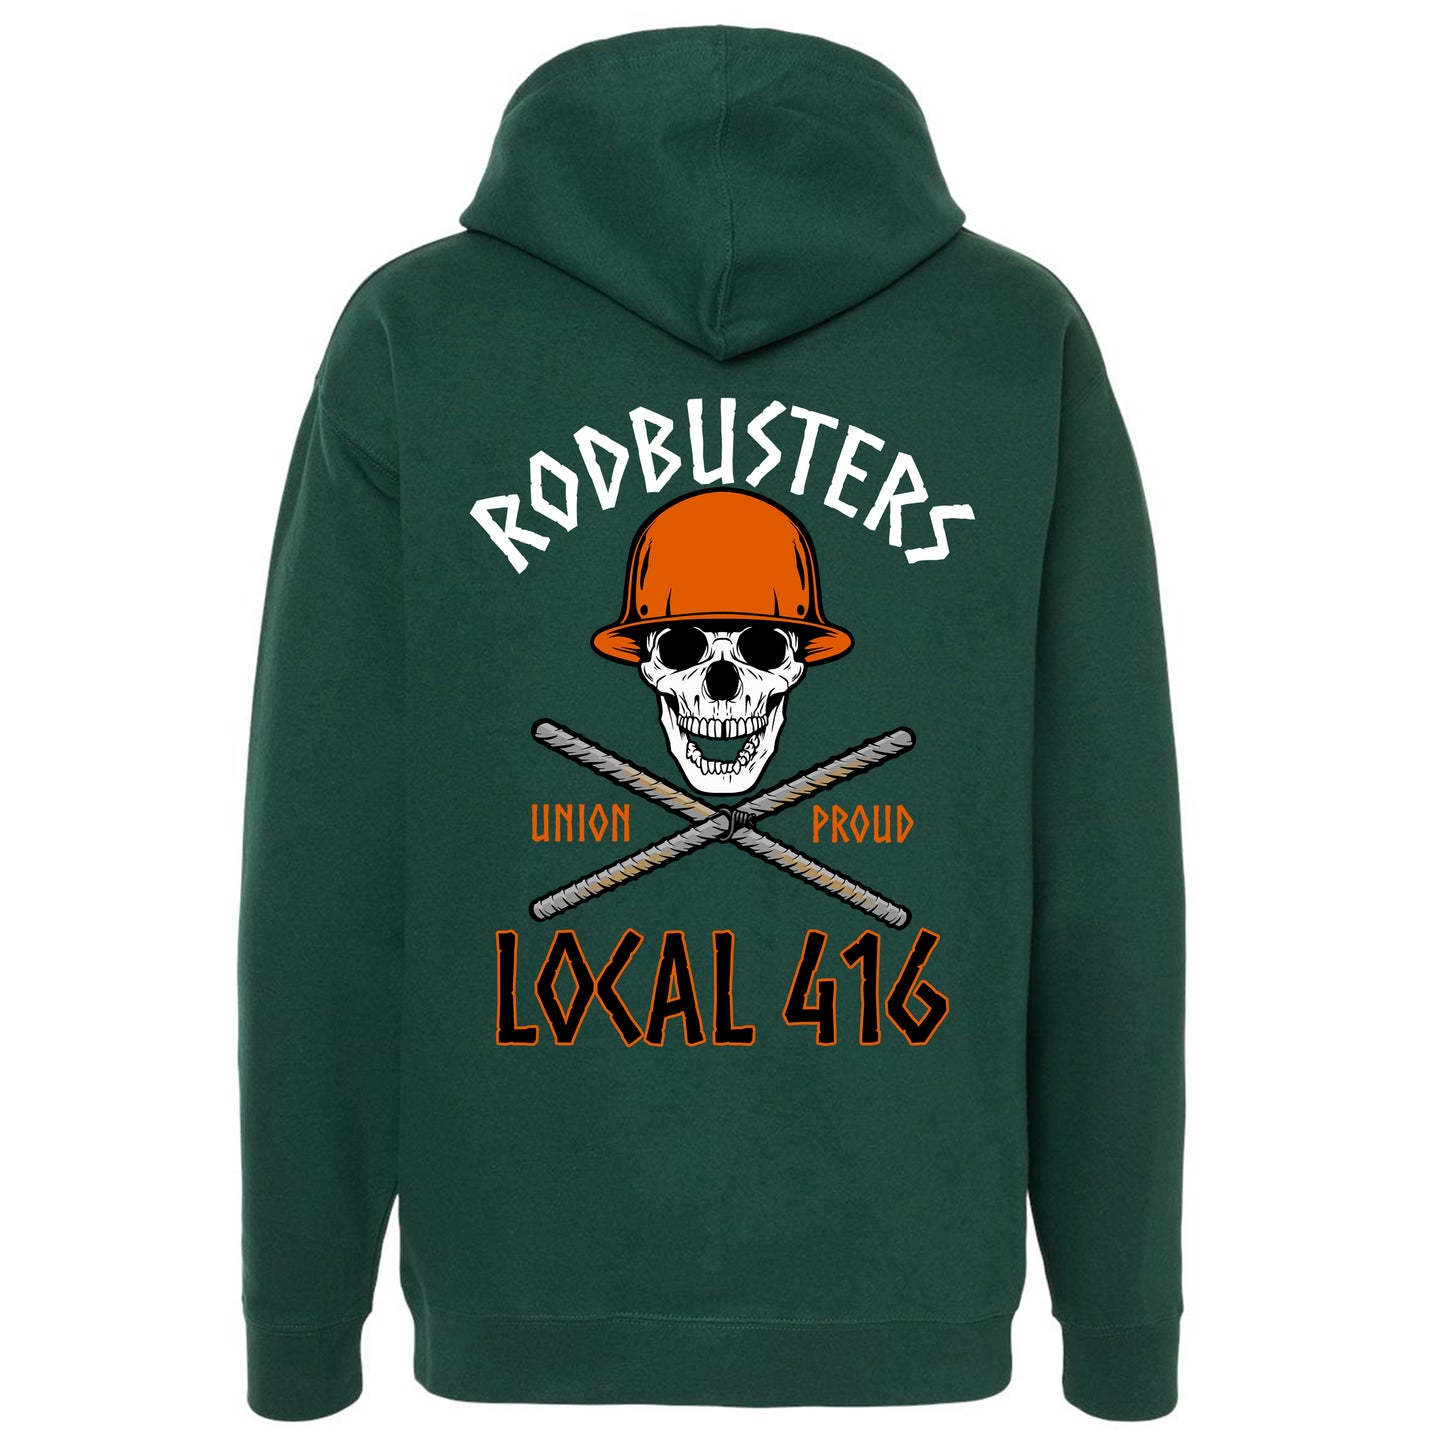 REBAR UNION PROUD PULLOVER HOODIE LOCAL 416